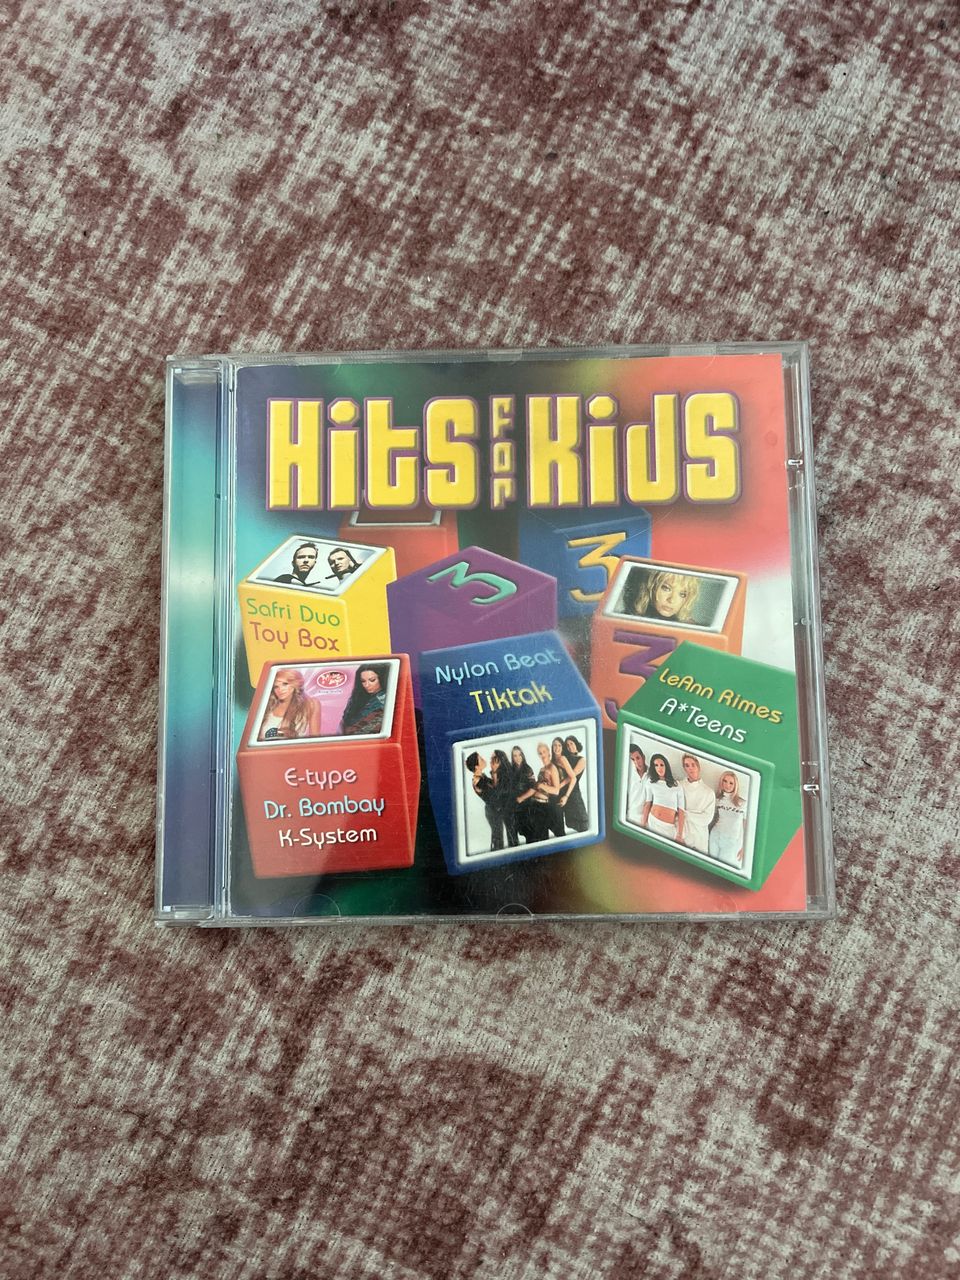 Hits For Kids 3